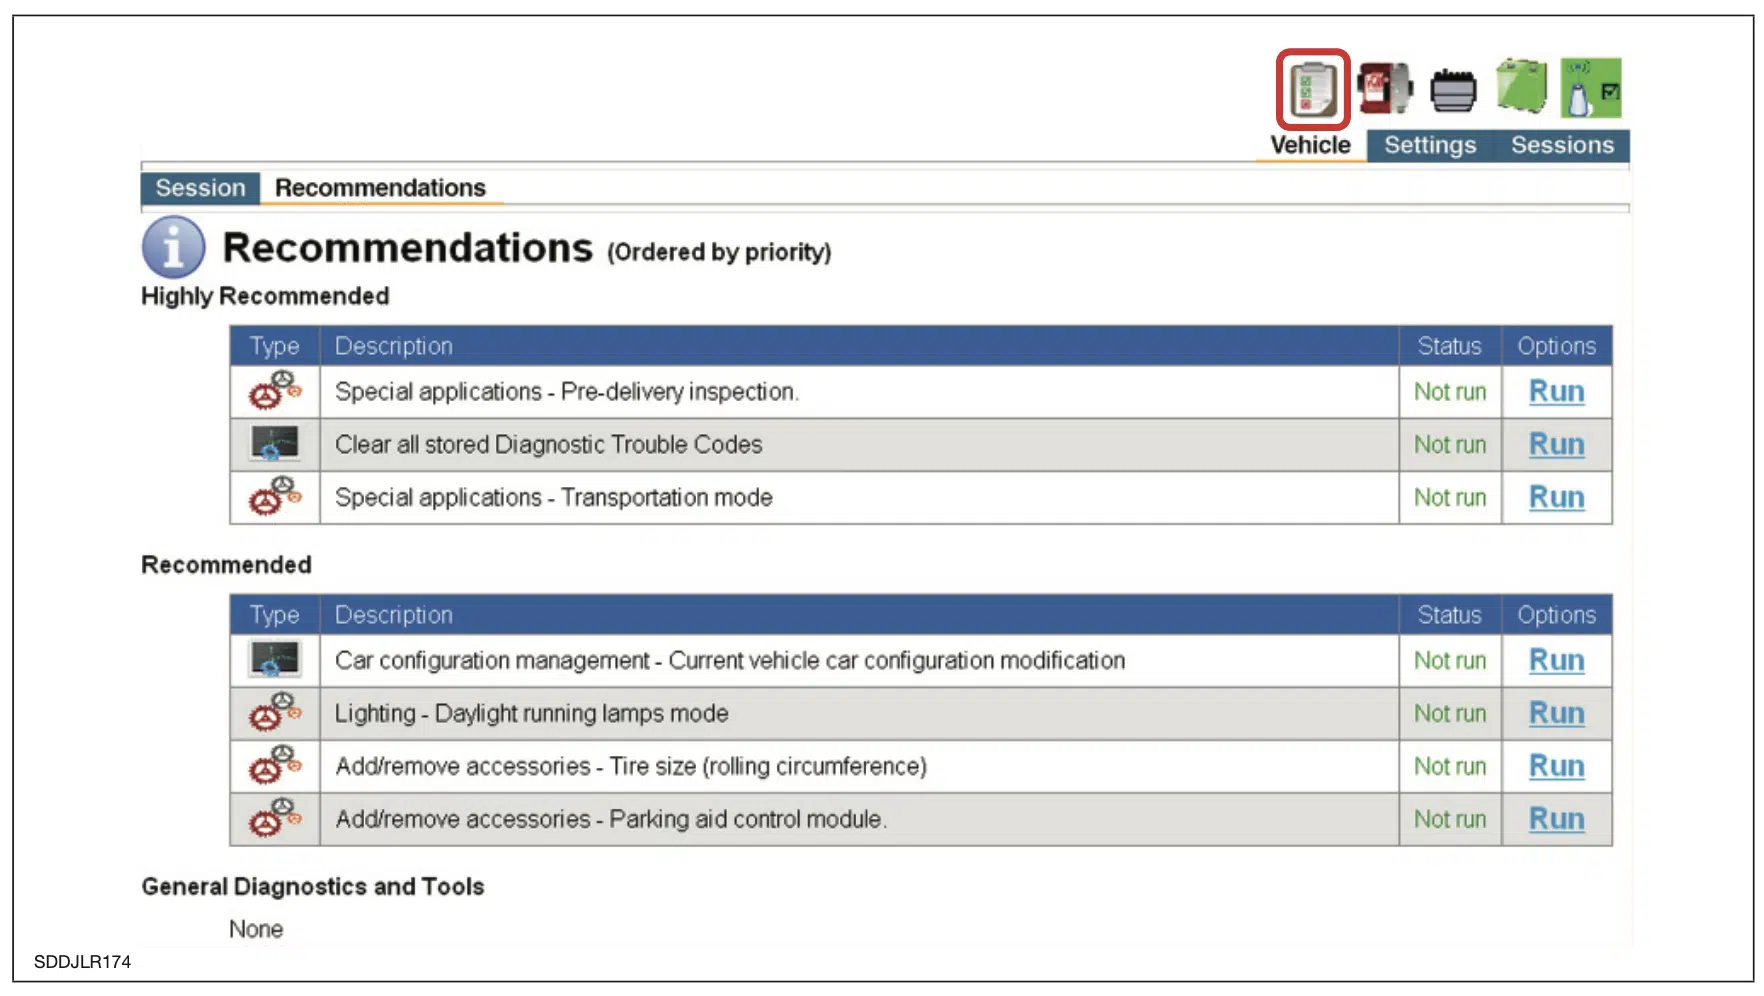 JLR SDD Software session screenshot for recommended actions after vehicle symptoms report